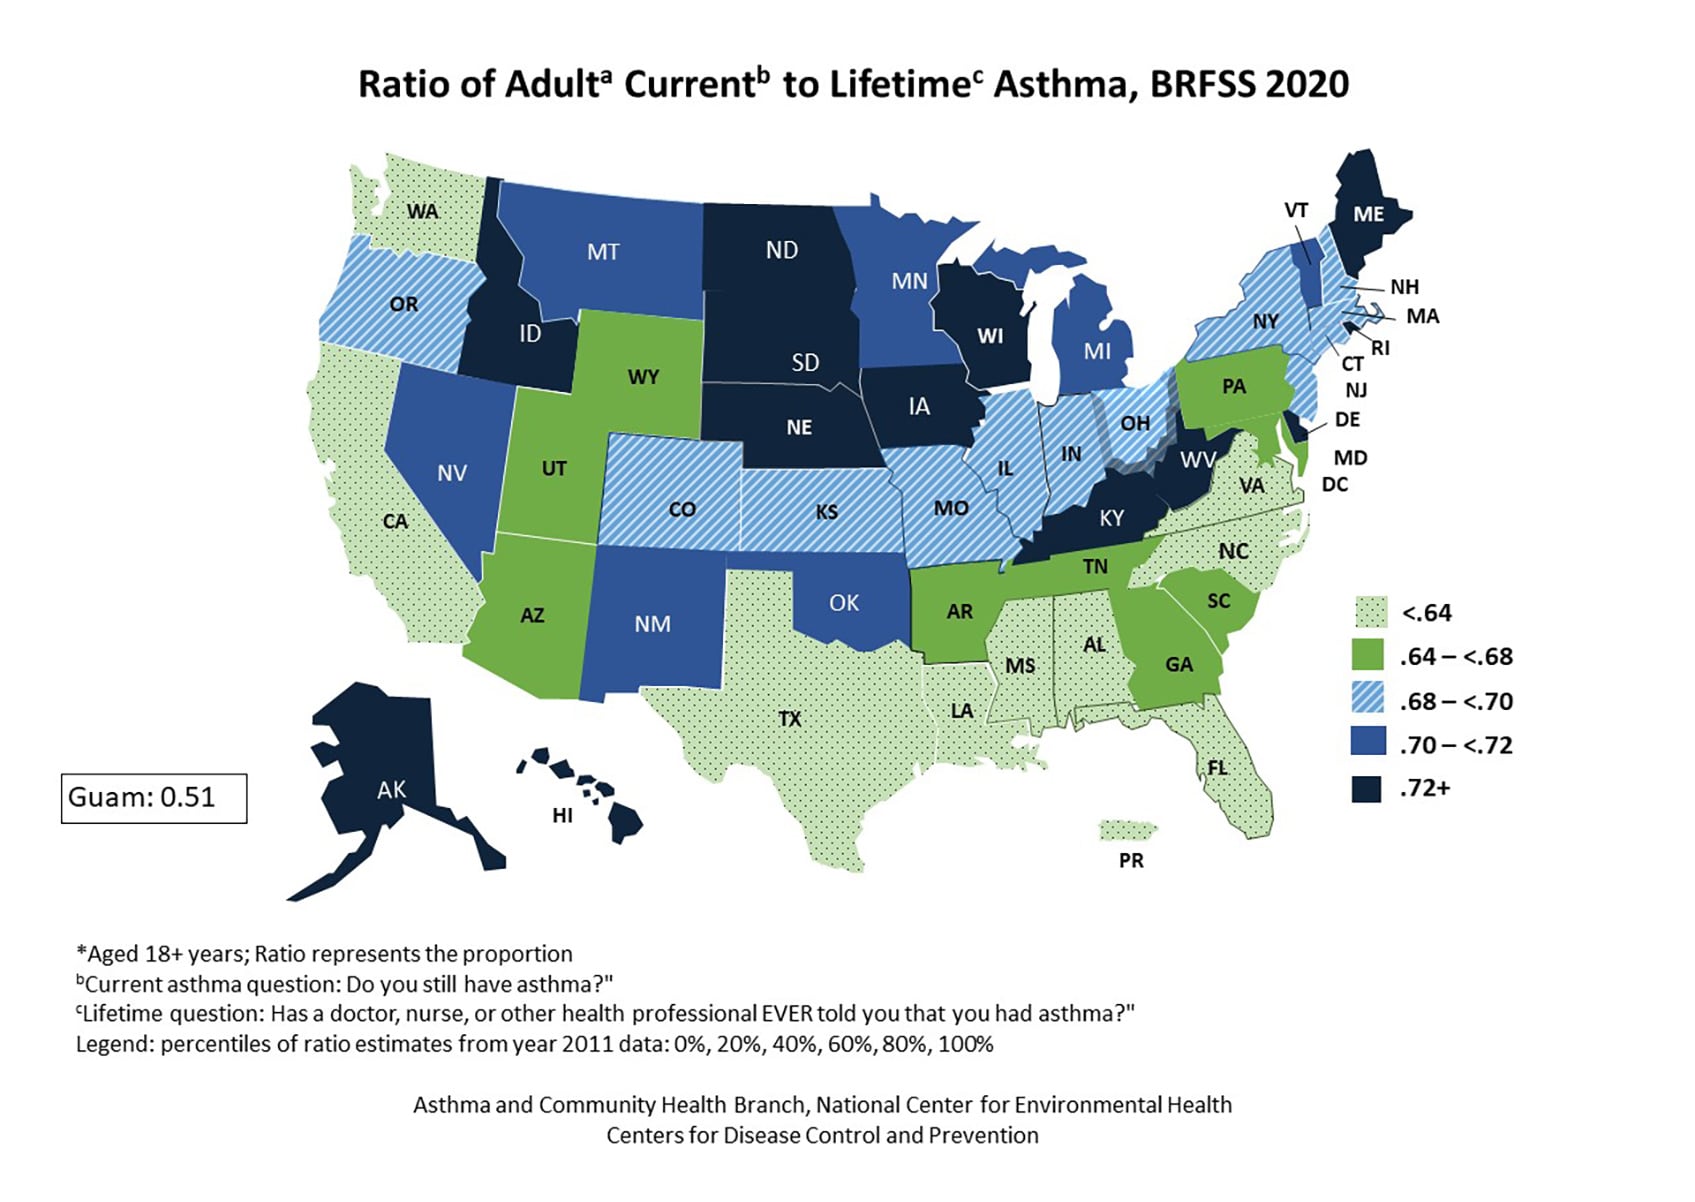 U.S. map showing ratio of adult self-reported current to lifetime asthma by state for BRFSS 2020